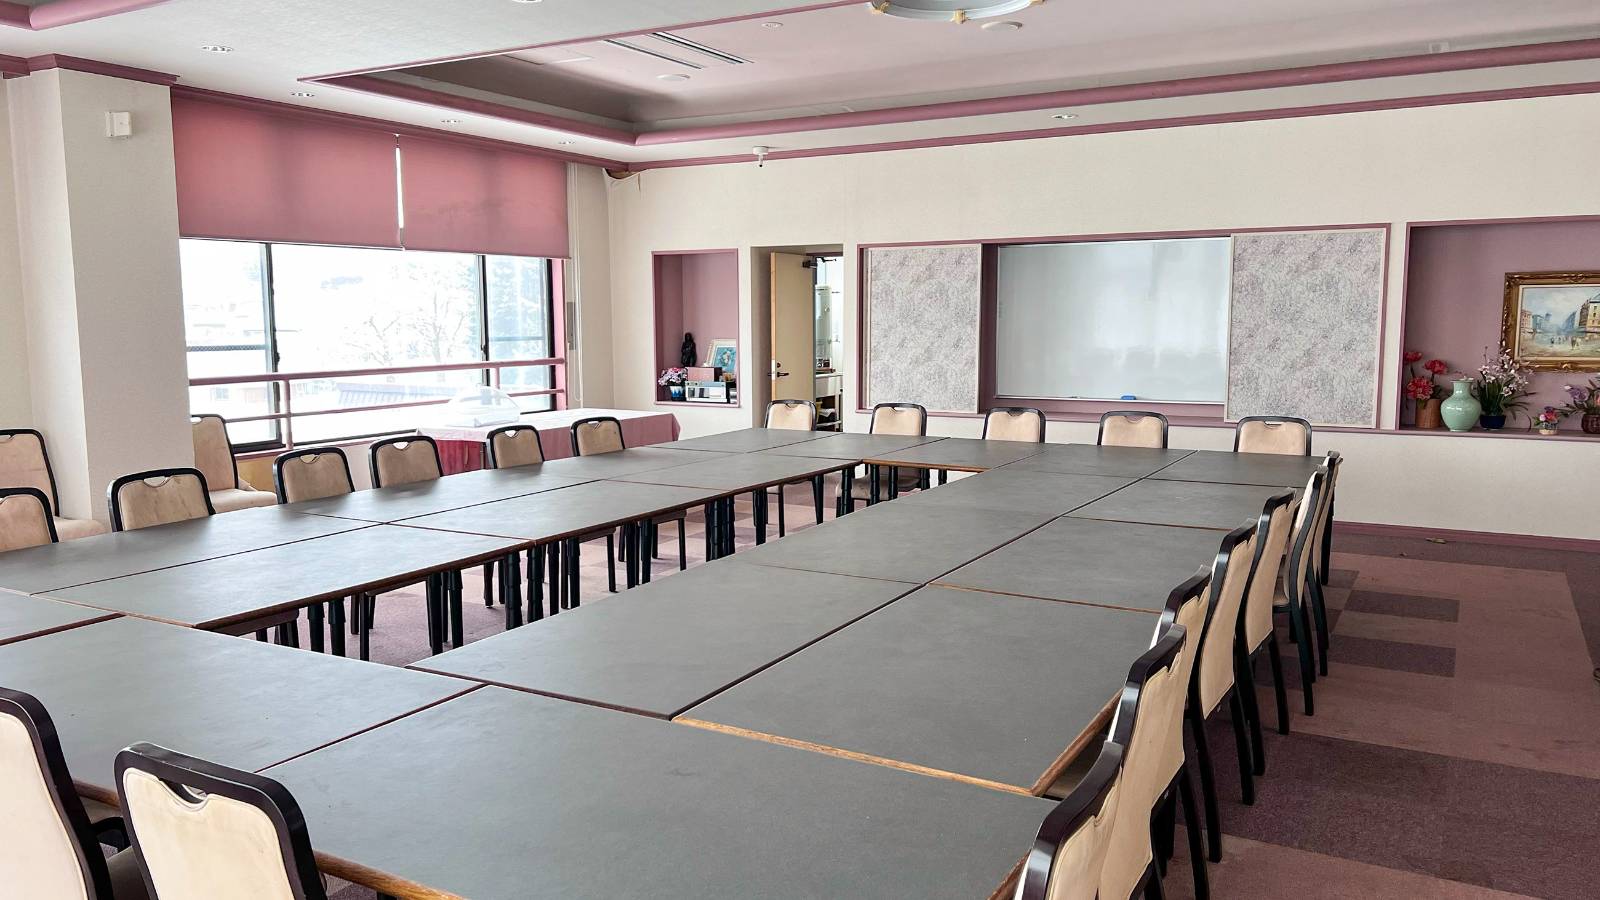 Large conference room that can also be used for dining.